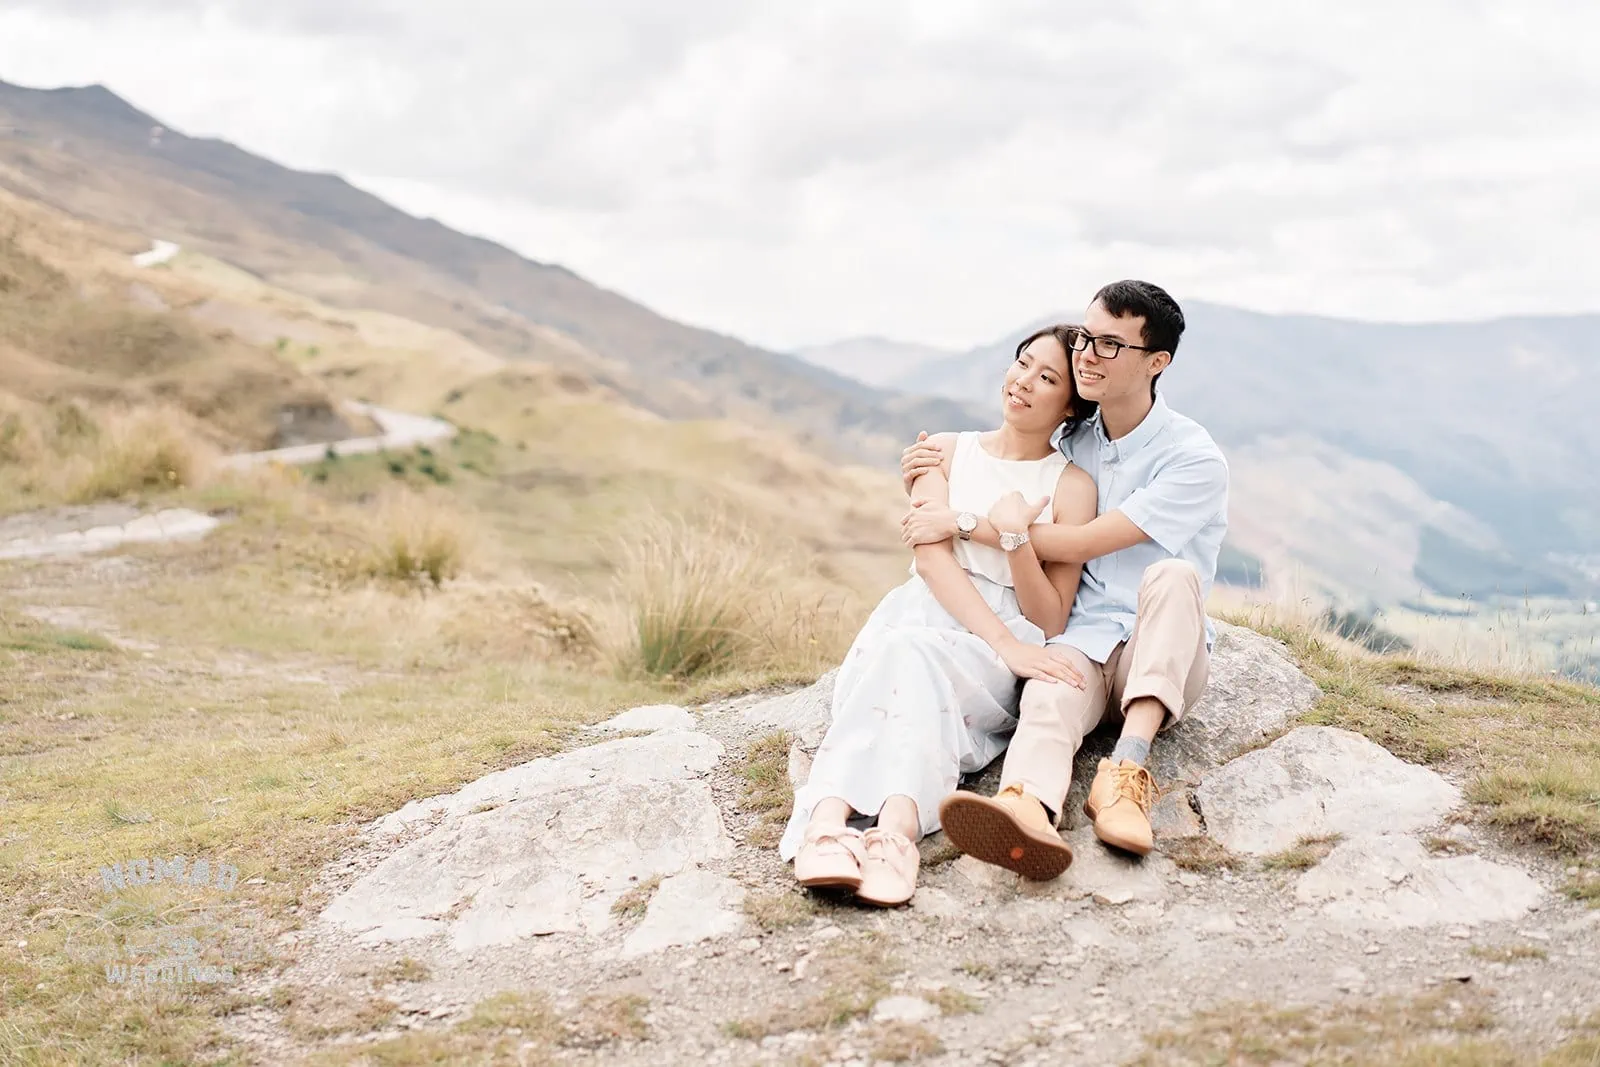 Queenstown New Zealand Elopement Wedding Photographer - Keywords: COUPLE, MOUNTAINS

Updated description: A couple enjoying the mountain views while seated on top of a rock.